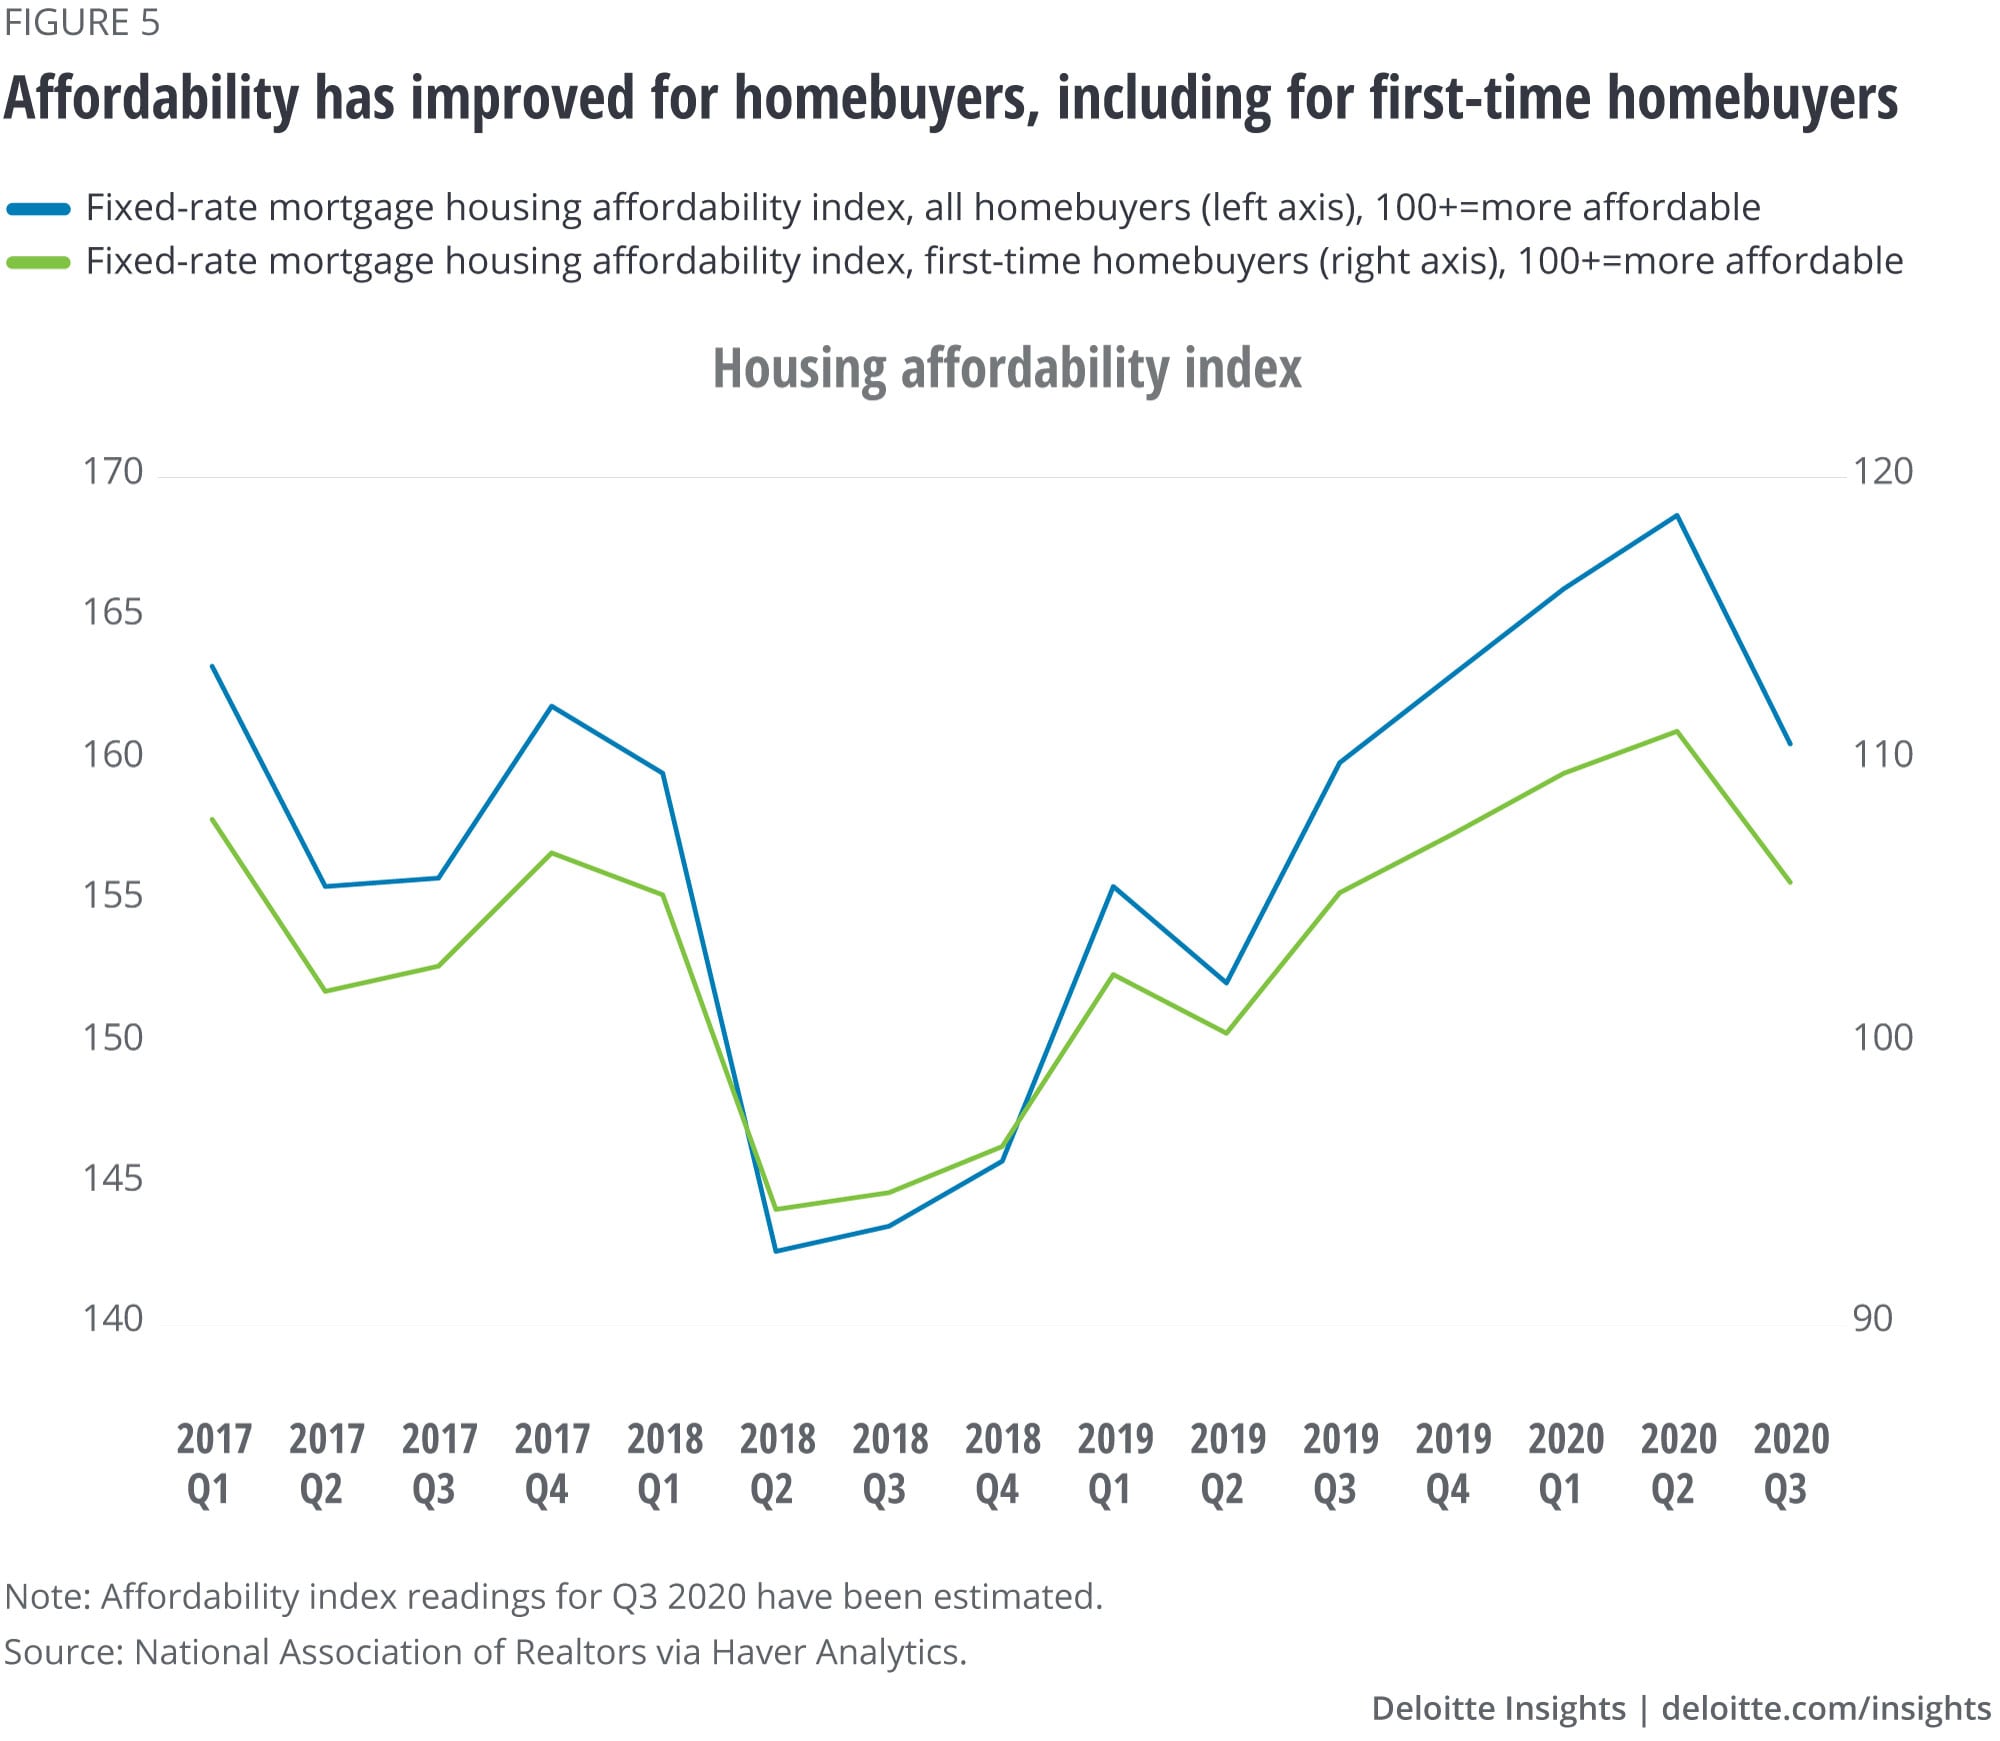 Affordability has improved for homebuyers, including for first-time homebuyers